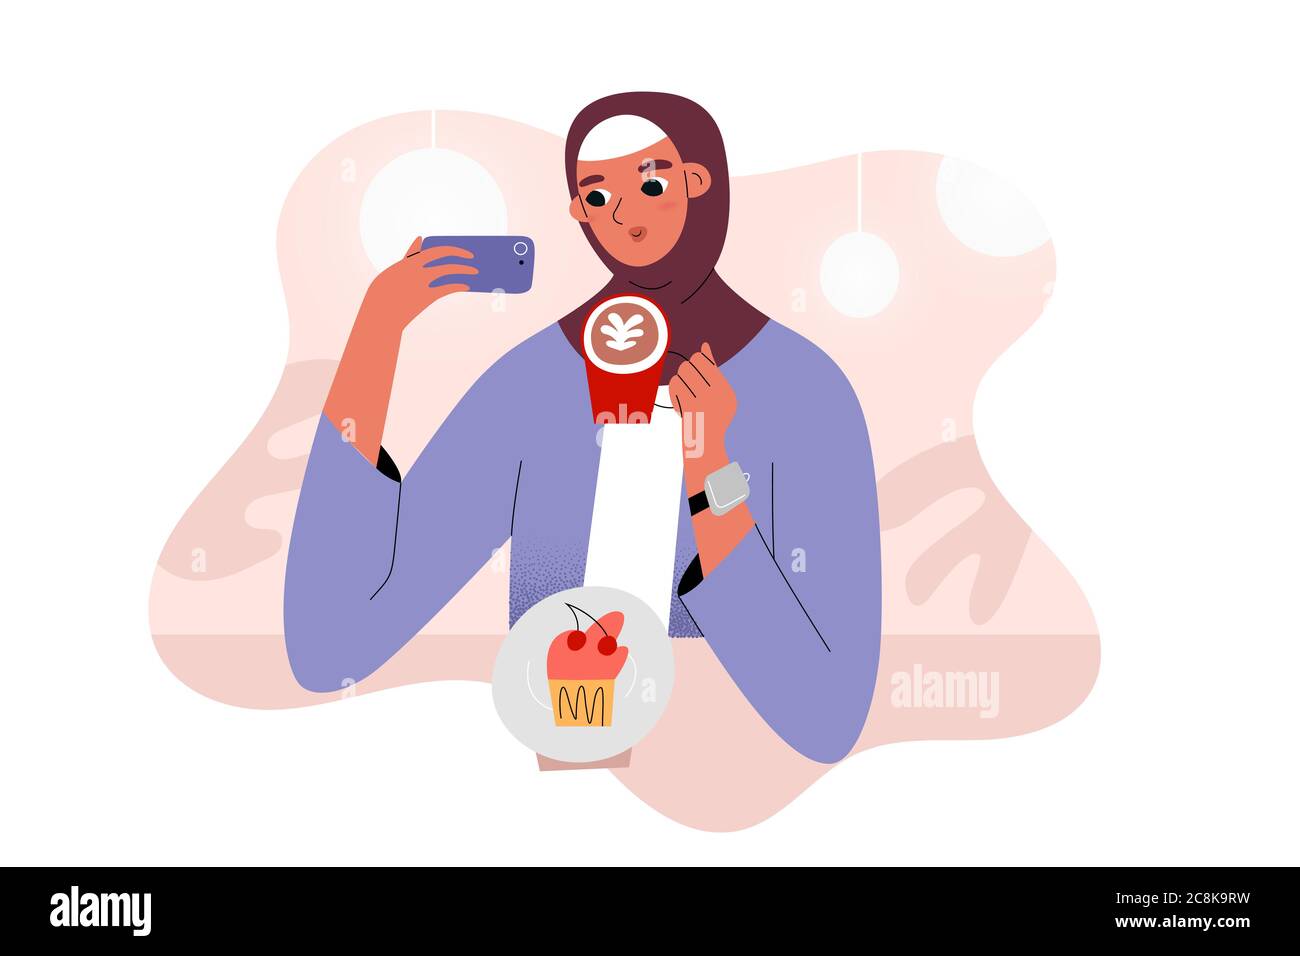 Arab girl in cafe taking a selfie with coffee mug, sitting at coffee shop table with dessert, female blogger taking photos, vector illustration Stock Vector